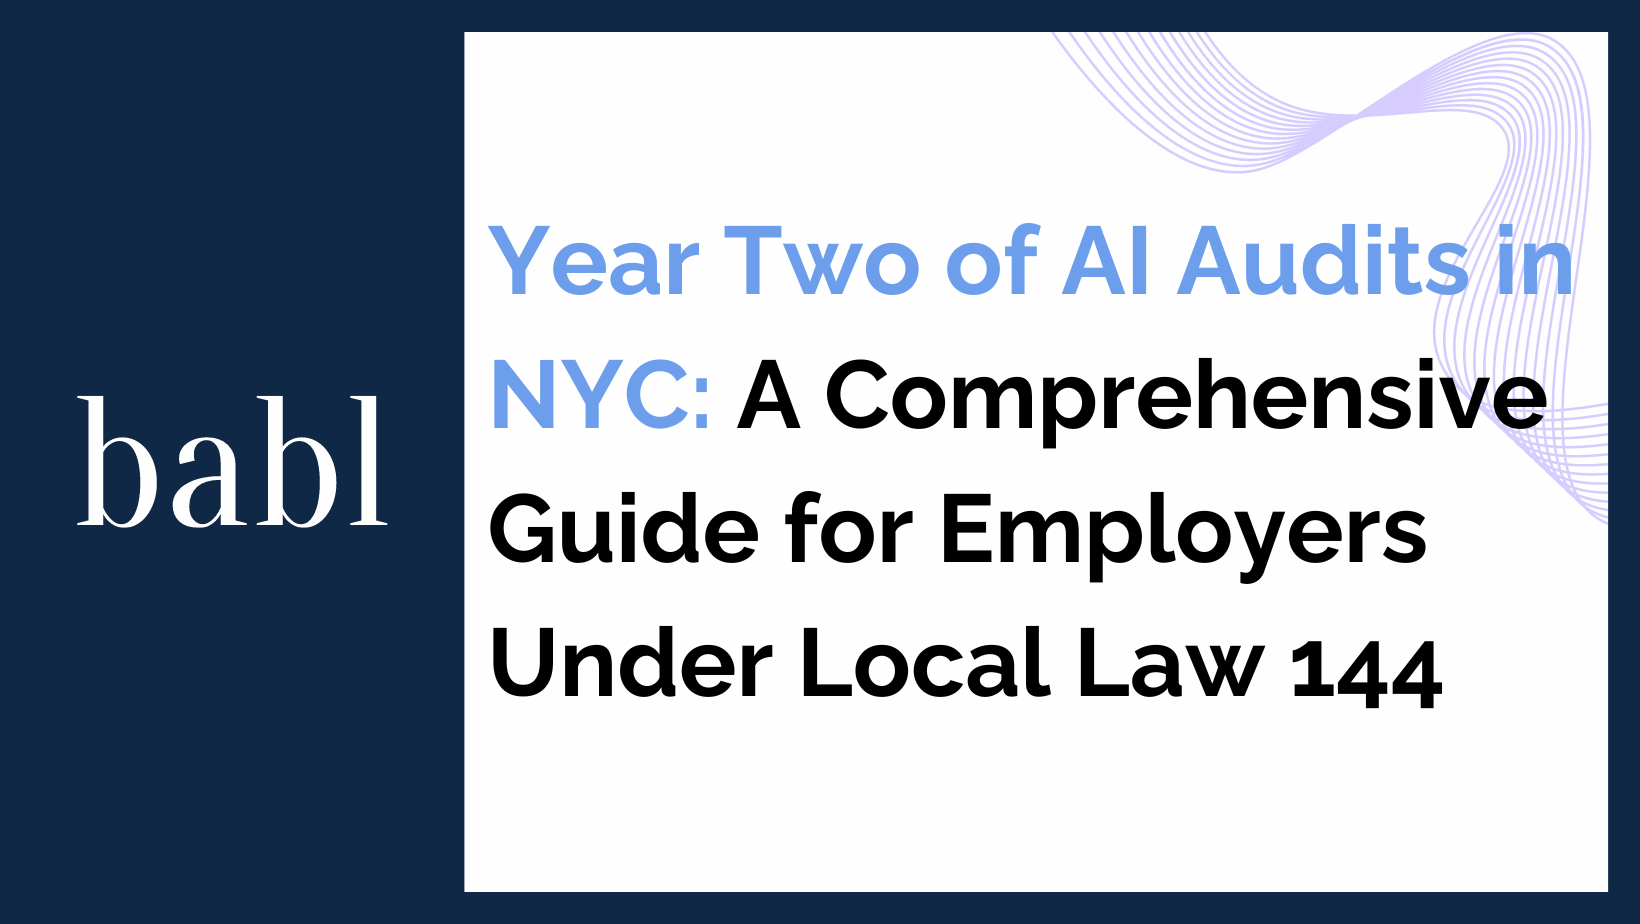 Year Two of AI Audits in NYC: A Comprehensive Guide for Employers Under Local Law 144